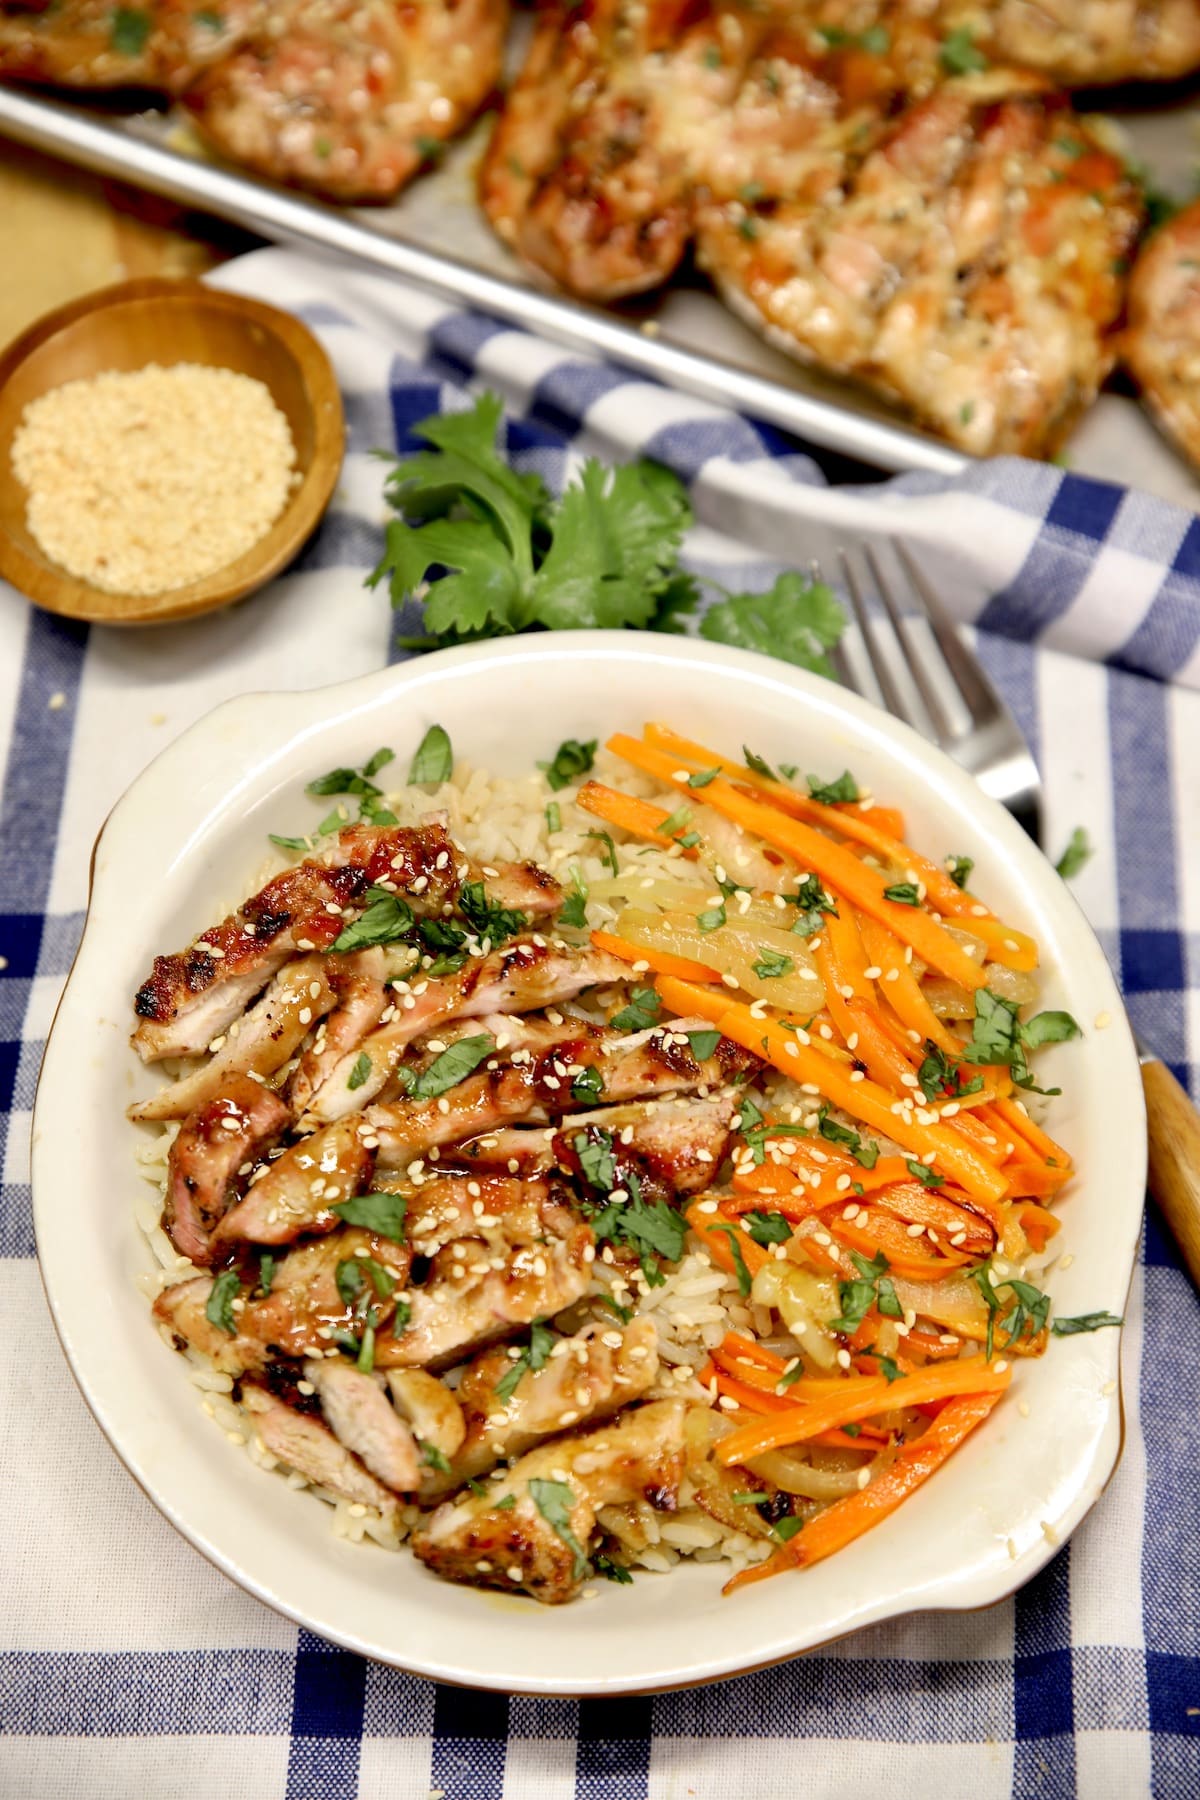 Grilled chicken slices in bowl of rice with carrots.